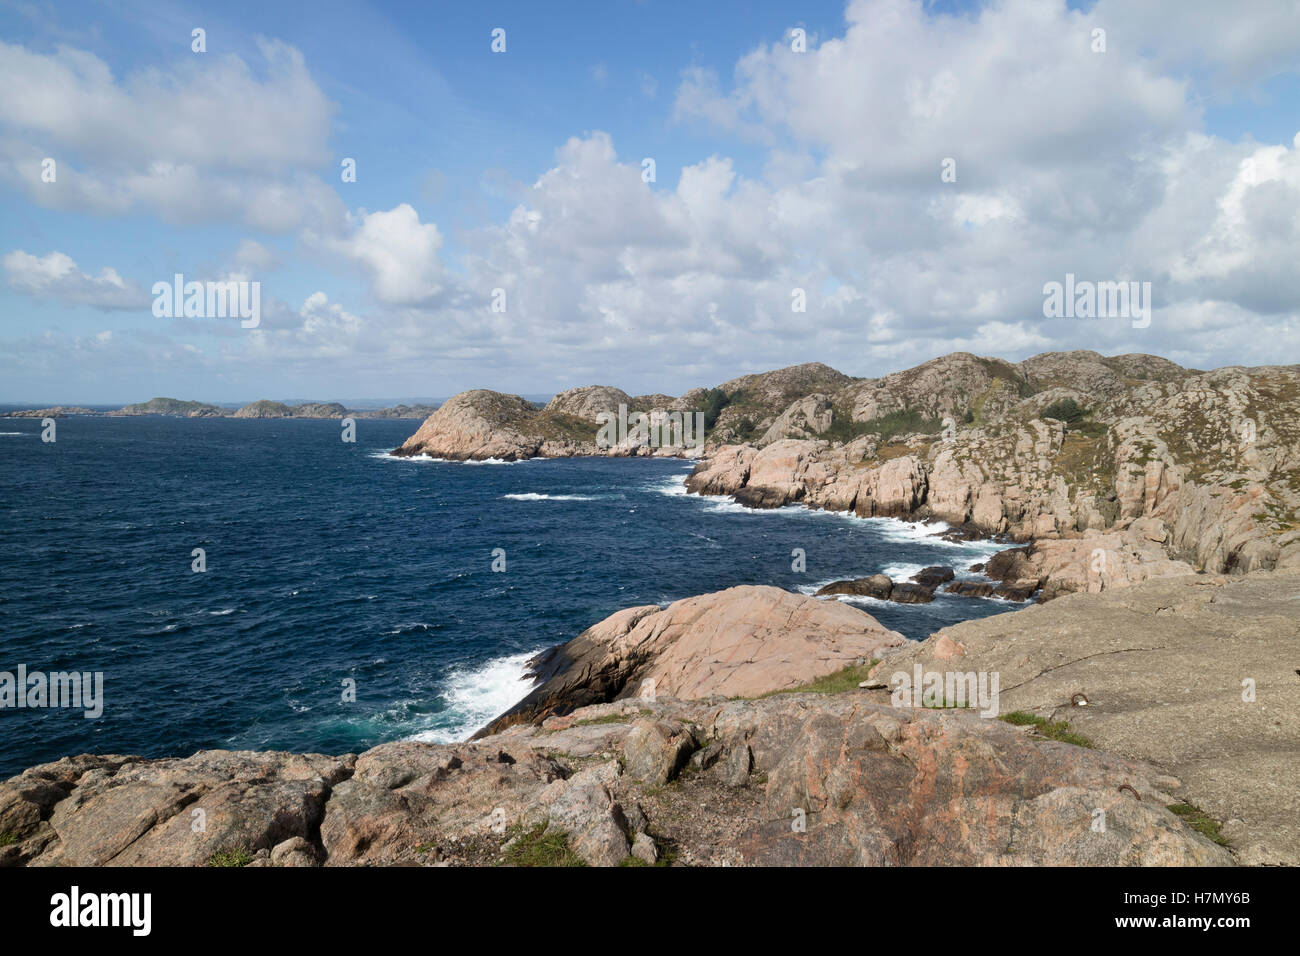 Sea view and rocks at  Lindesnes, Norway Stock Photo